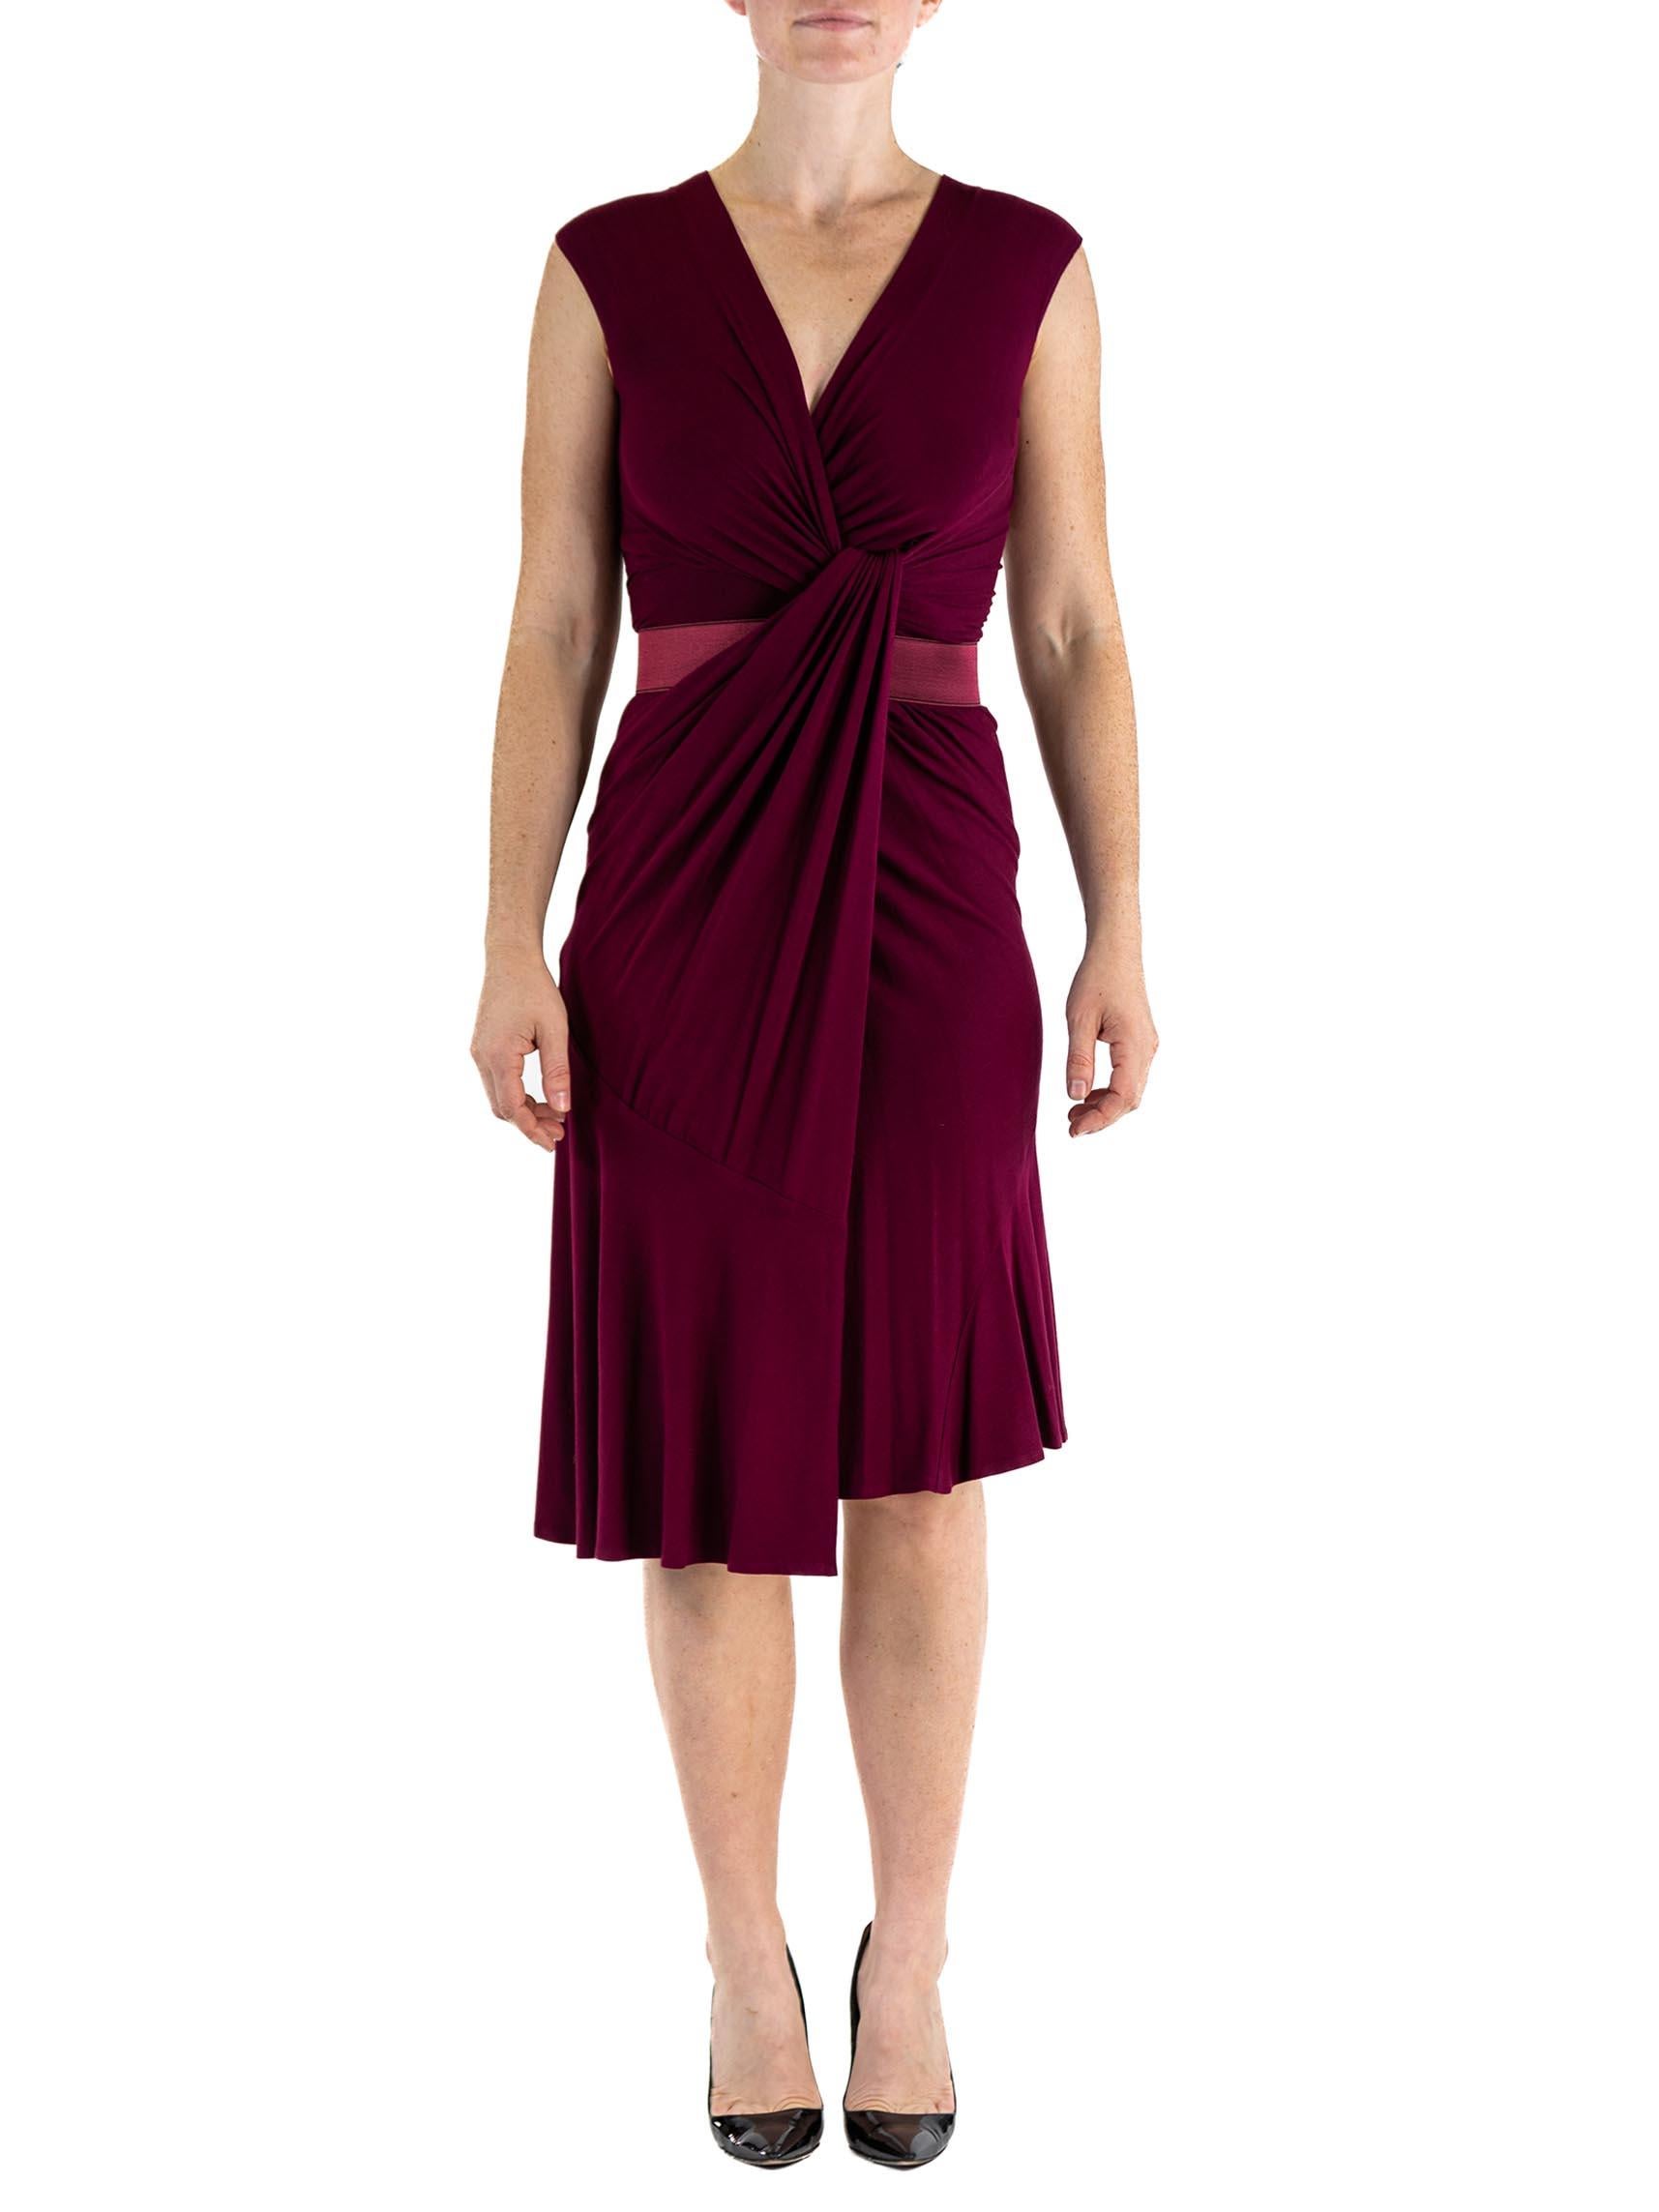 2000S DONNA KARAN Garnet Red Rayon Jersey Knot Front Ruched Dress With Belt For Sale 1